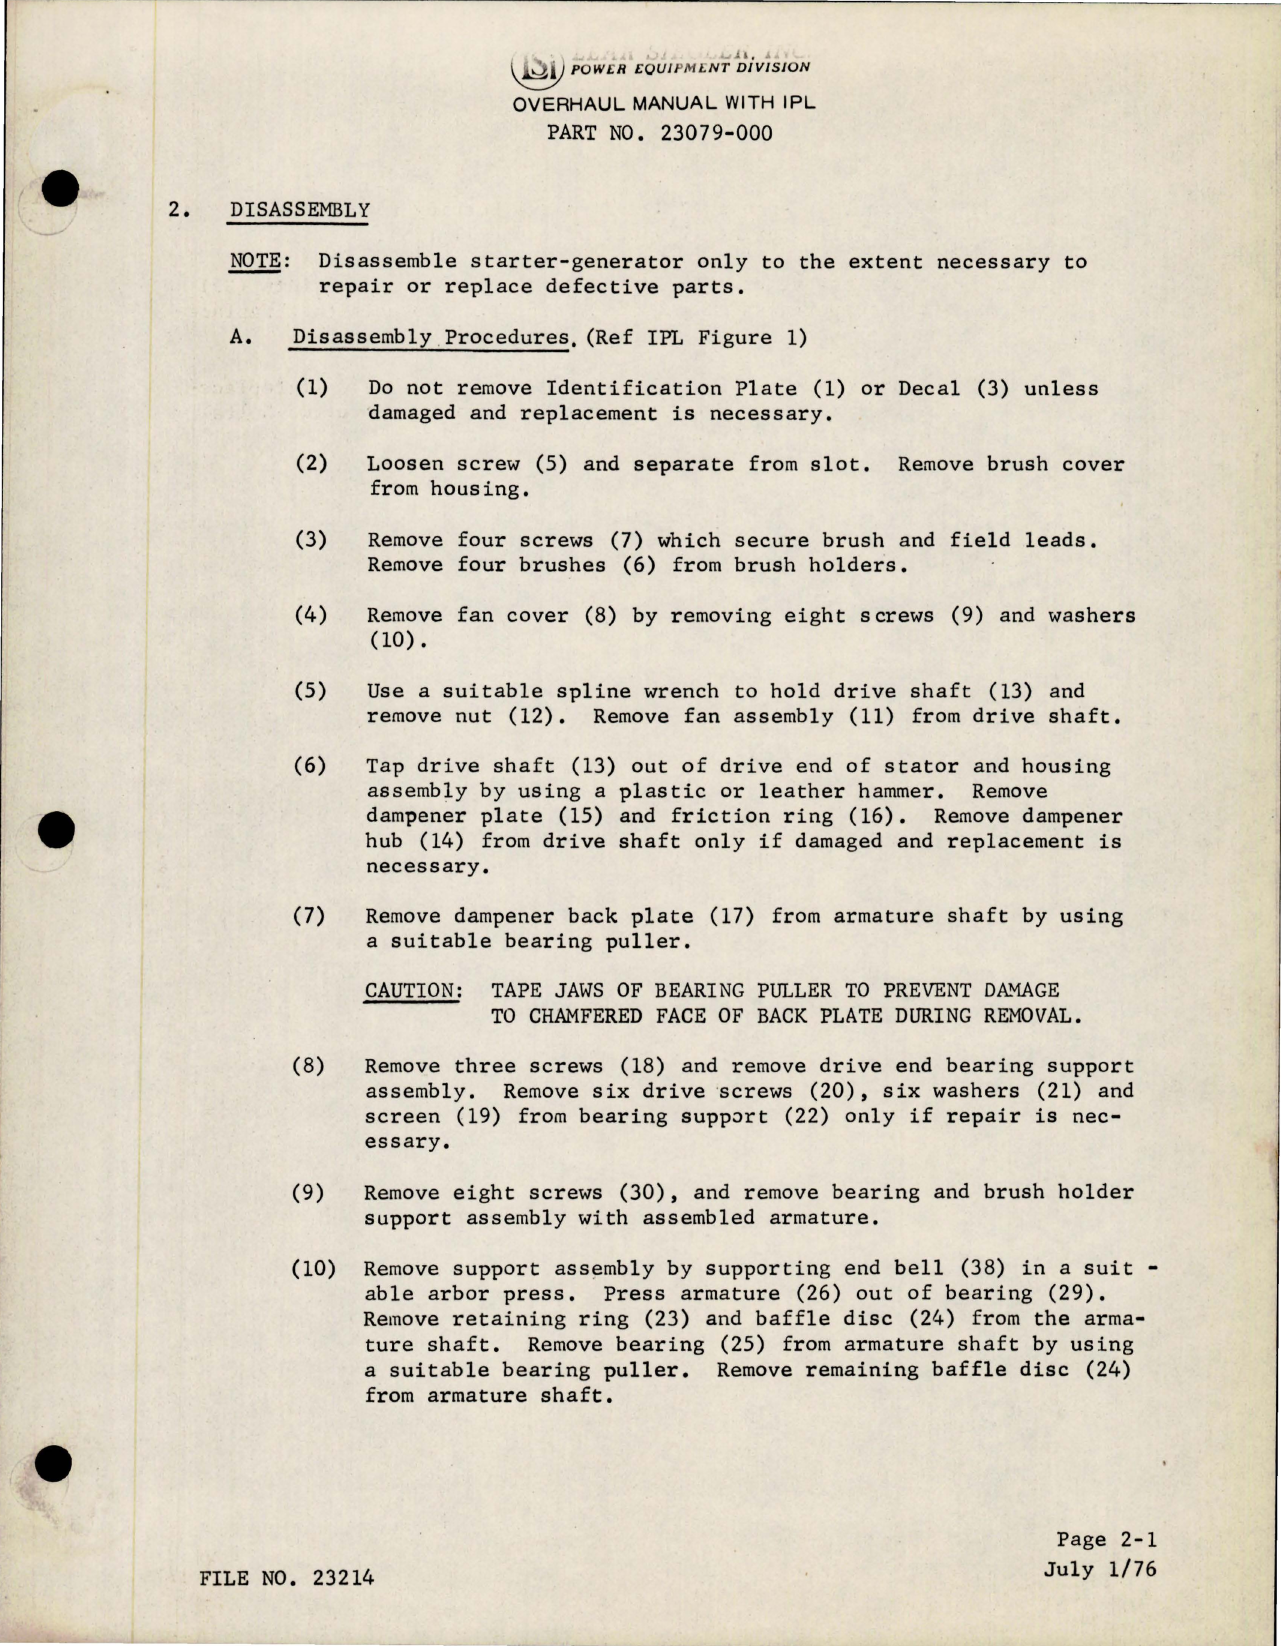 Sample page 7 from AirCorps Library document: Overhaul with Illustrated Parts List for Starter Generator - Model 23079-000 